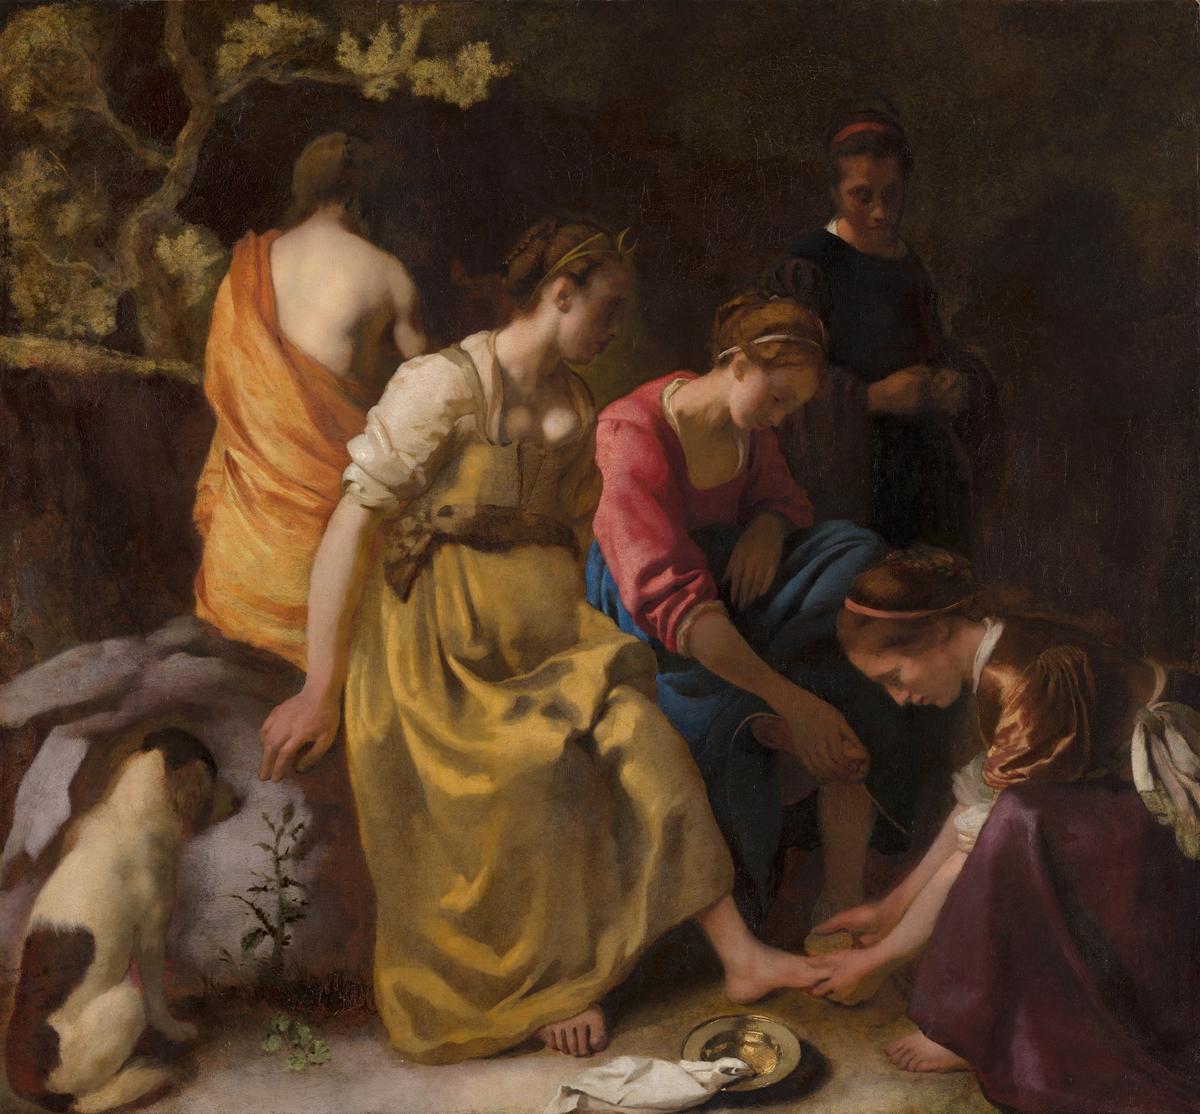 Johannes Vermeer's Diana and her Nymphs (1653-54), part of Mauritshuis collection, will now join the Rijksmuseum's exhibition Courtesy of the Mauritshuis, The Hague